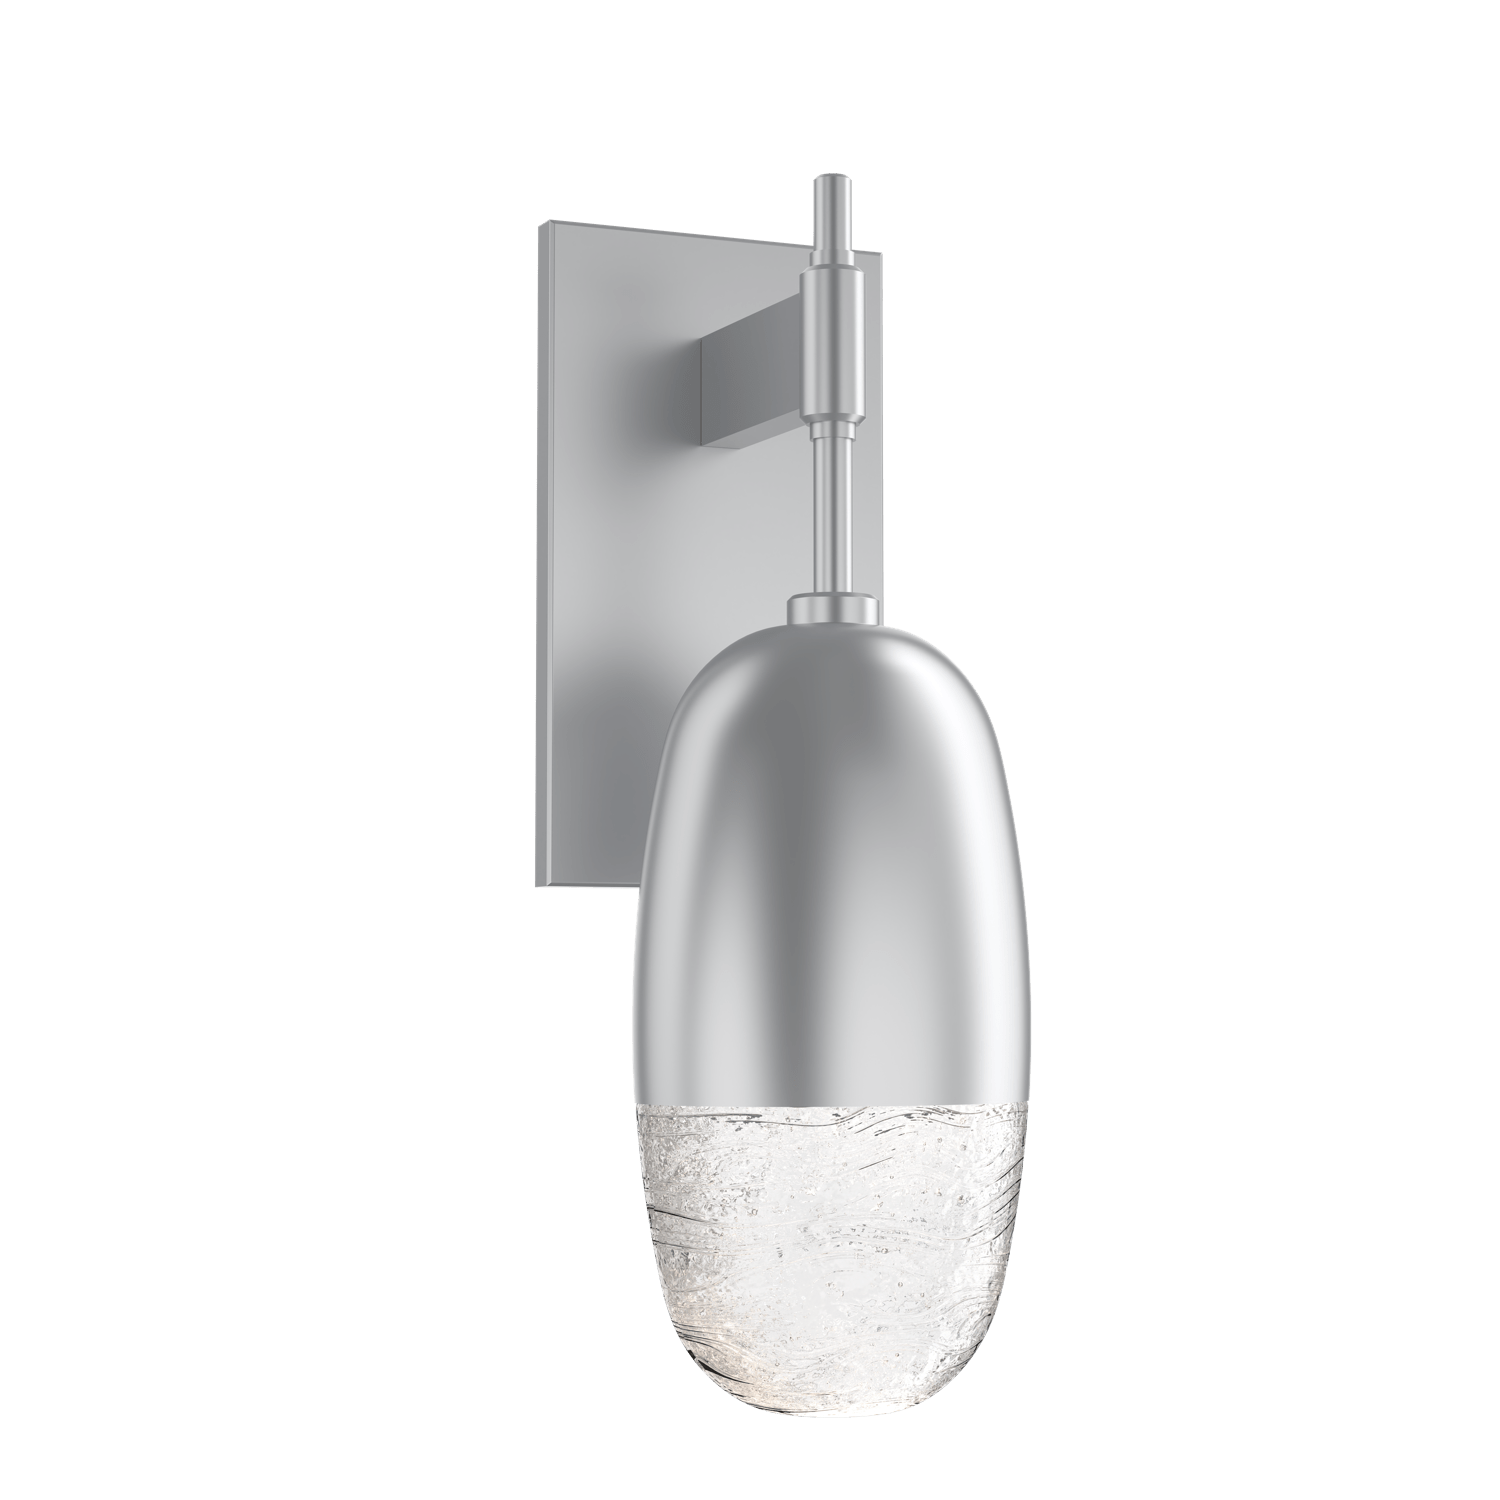 IDB0079-01-CS-Hammerton-Studio-Pebble-wall-sconce-with-classic-silver-finish-and-clear-cast-glass-shades-and-LED-lamping